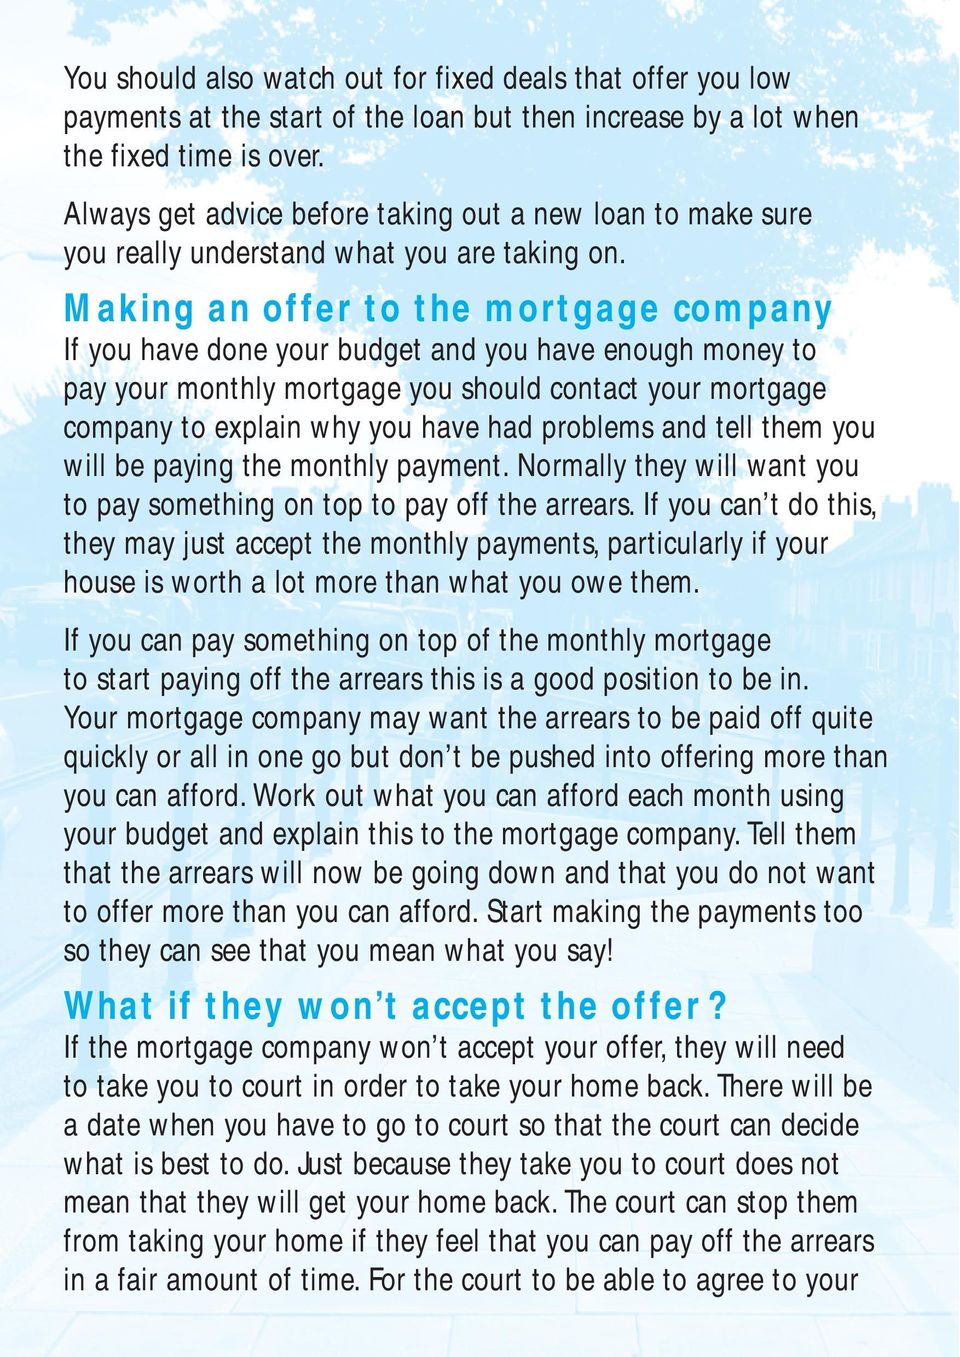 Making an offer to the mortgage company If you have done your budget and you have enough money to pay your monthly mortgage you should contact your mortgage company to explain why you have had